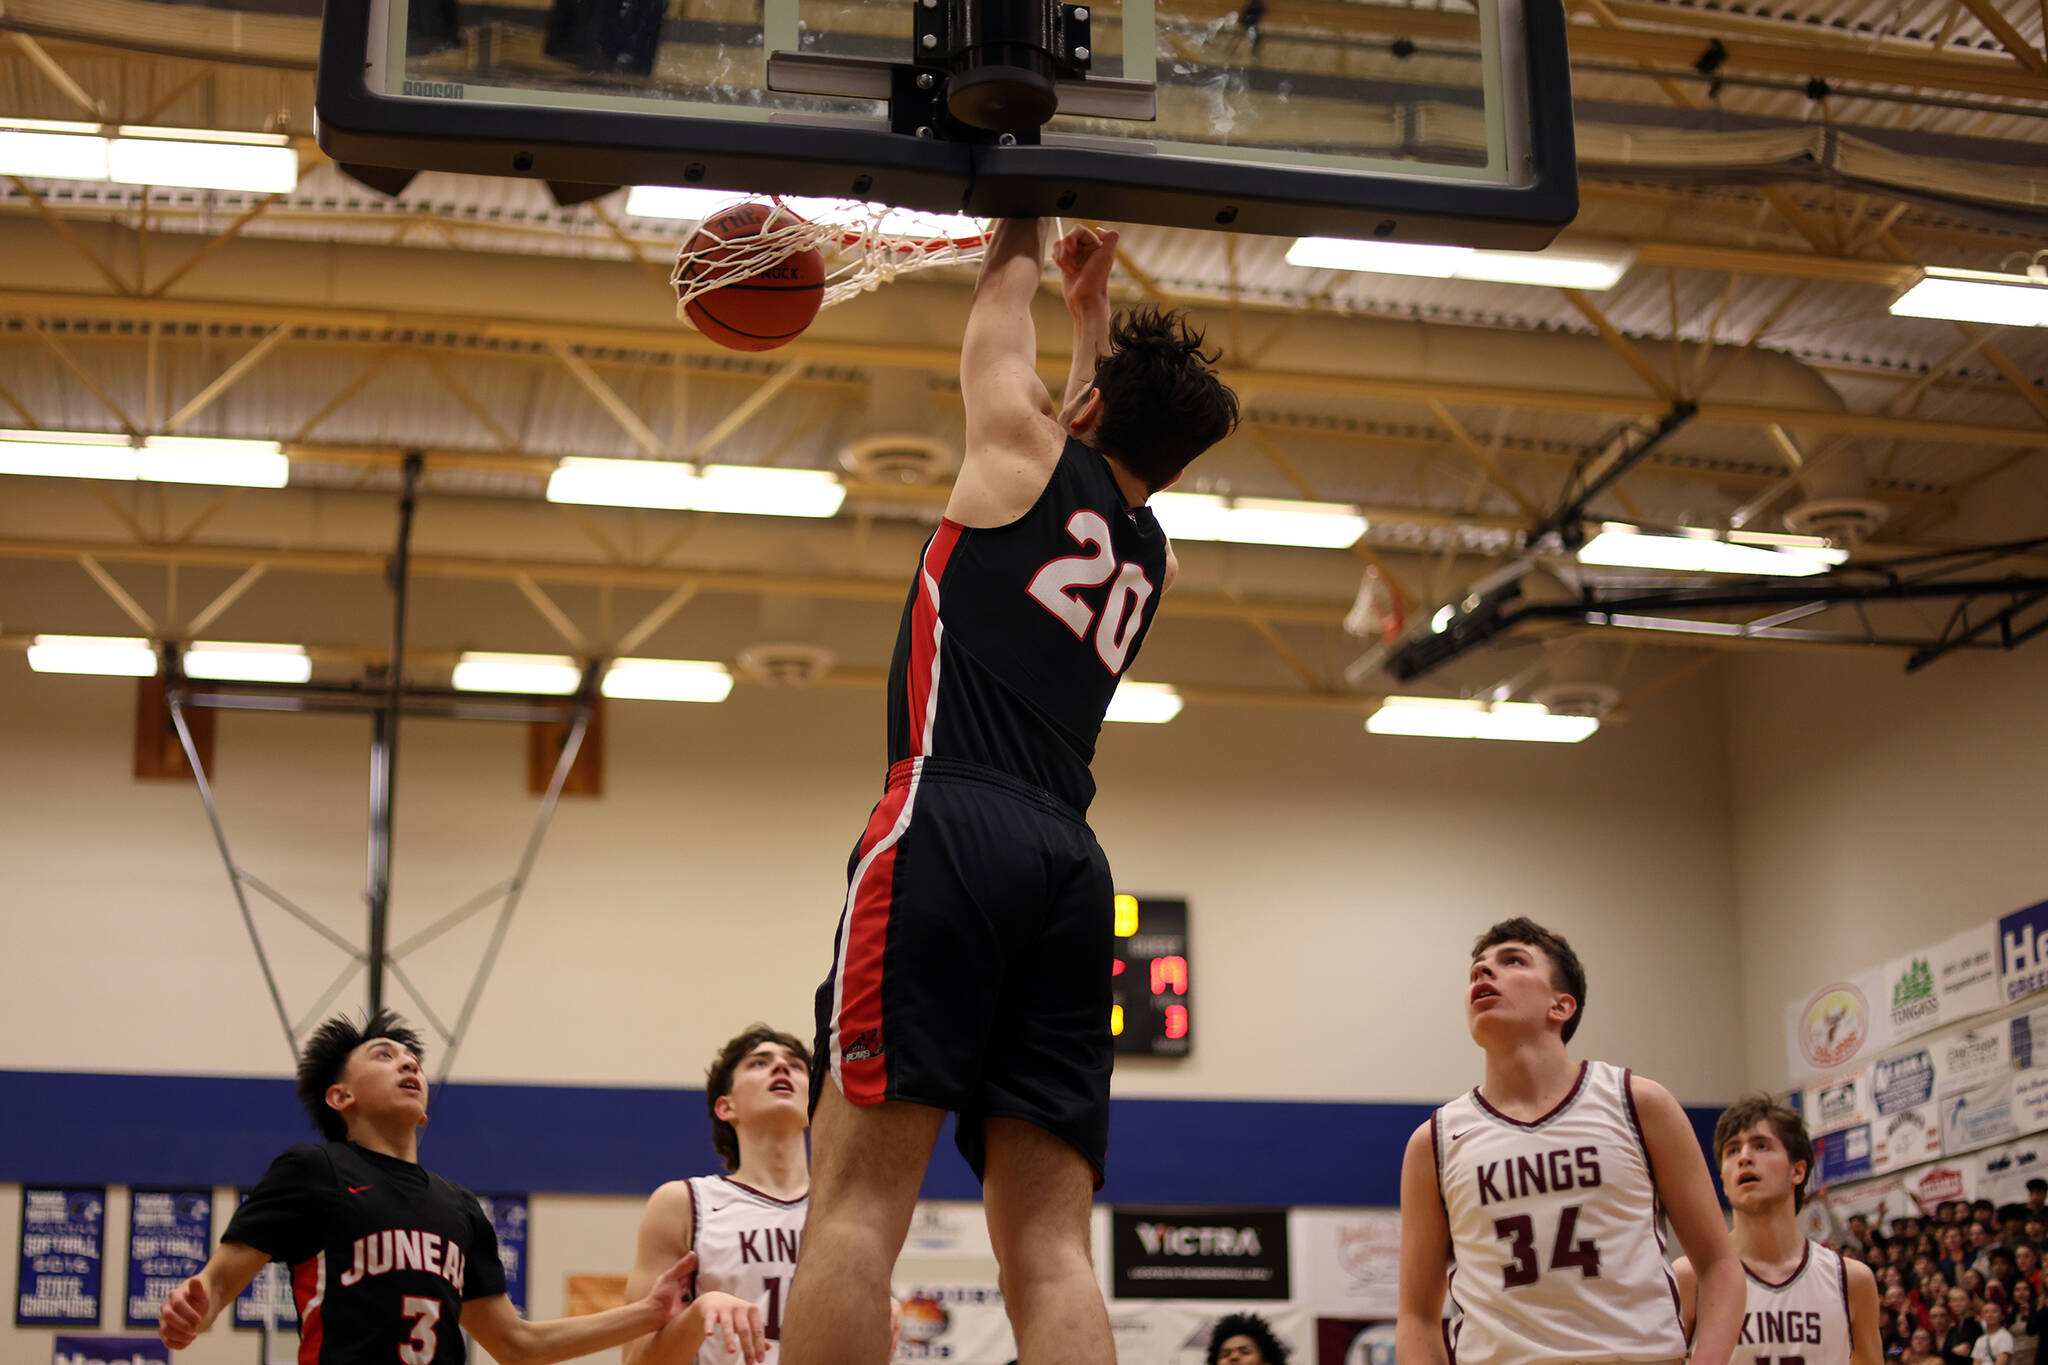 JDHS senior Orion Dybdahl finishes a dunk with authority as teammate Alwen Carrillo (3) and Kayhi’s, Marcus Stockhausen (34) and Andrew Kleinschmidt (13) look on. Dybdahl earned third team all-state honors with his play this season. (Ben Hohenstatt / Juneau Empire)